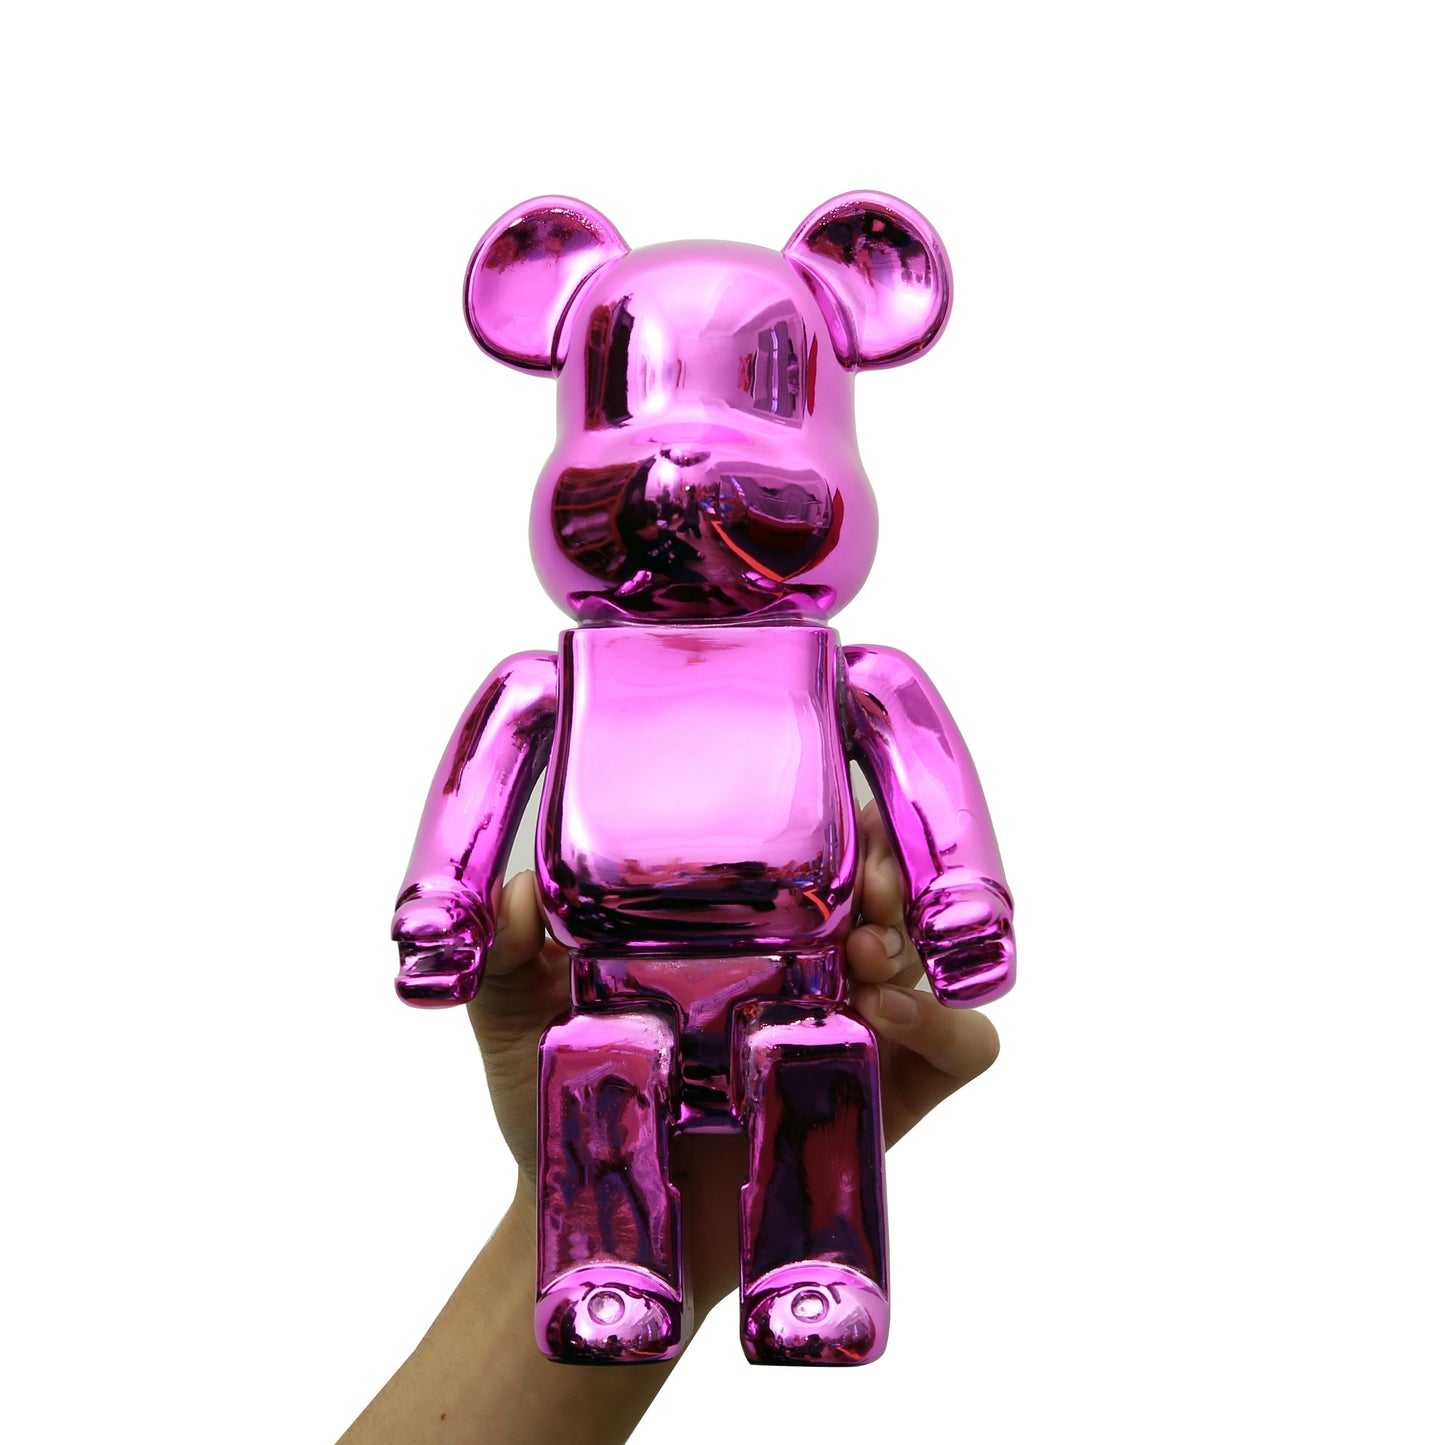 TEEK - 11 inch Solid and Camo Color Various Collectible Figurines HOME DECOR theteekdotcom Pink Bear  